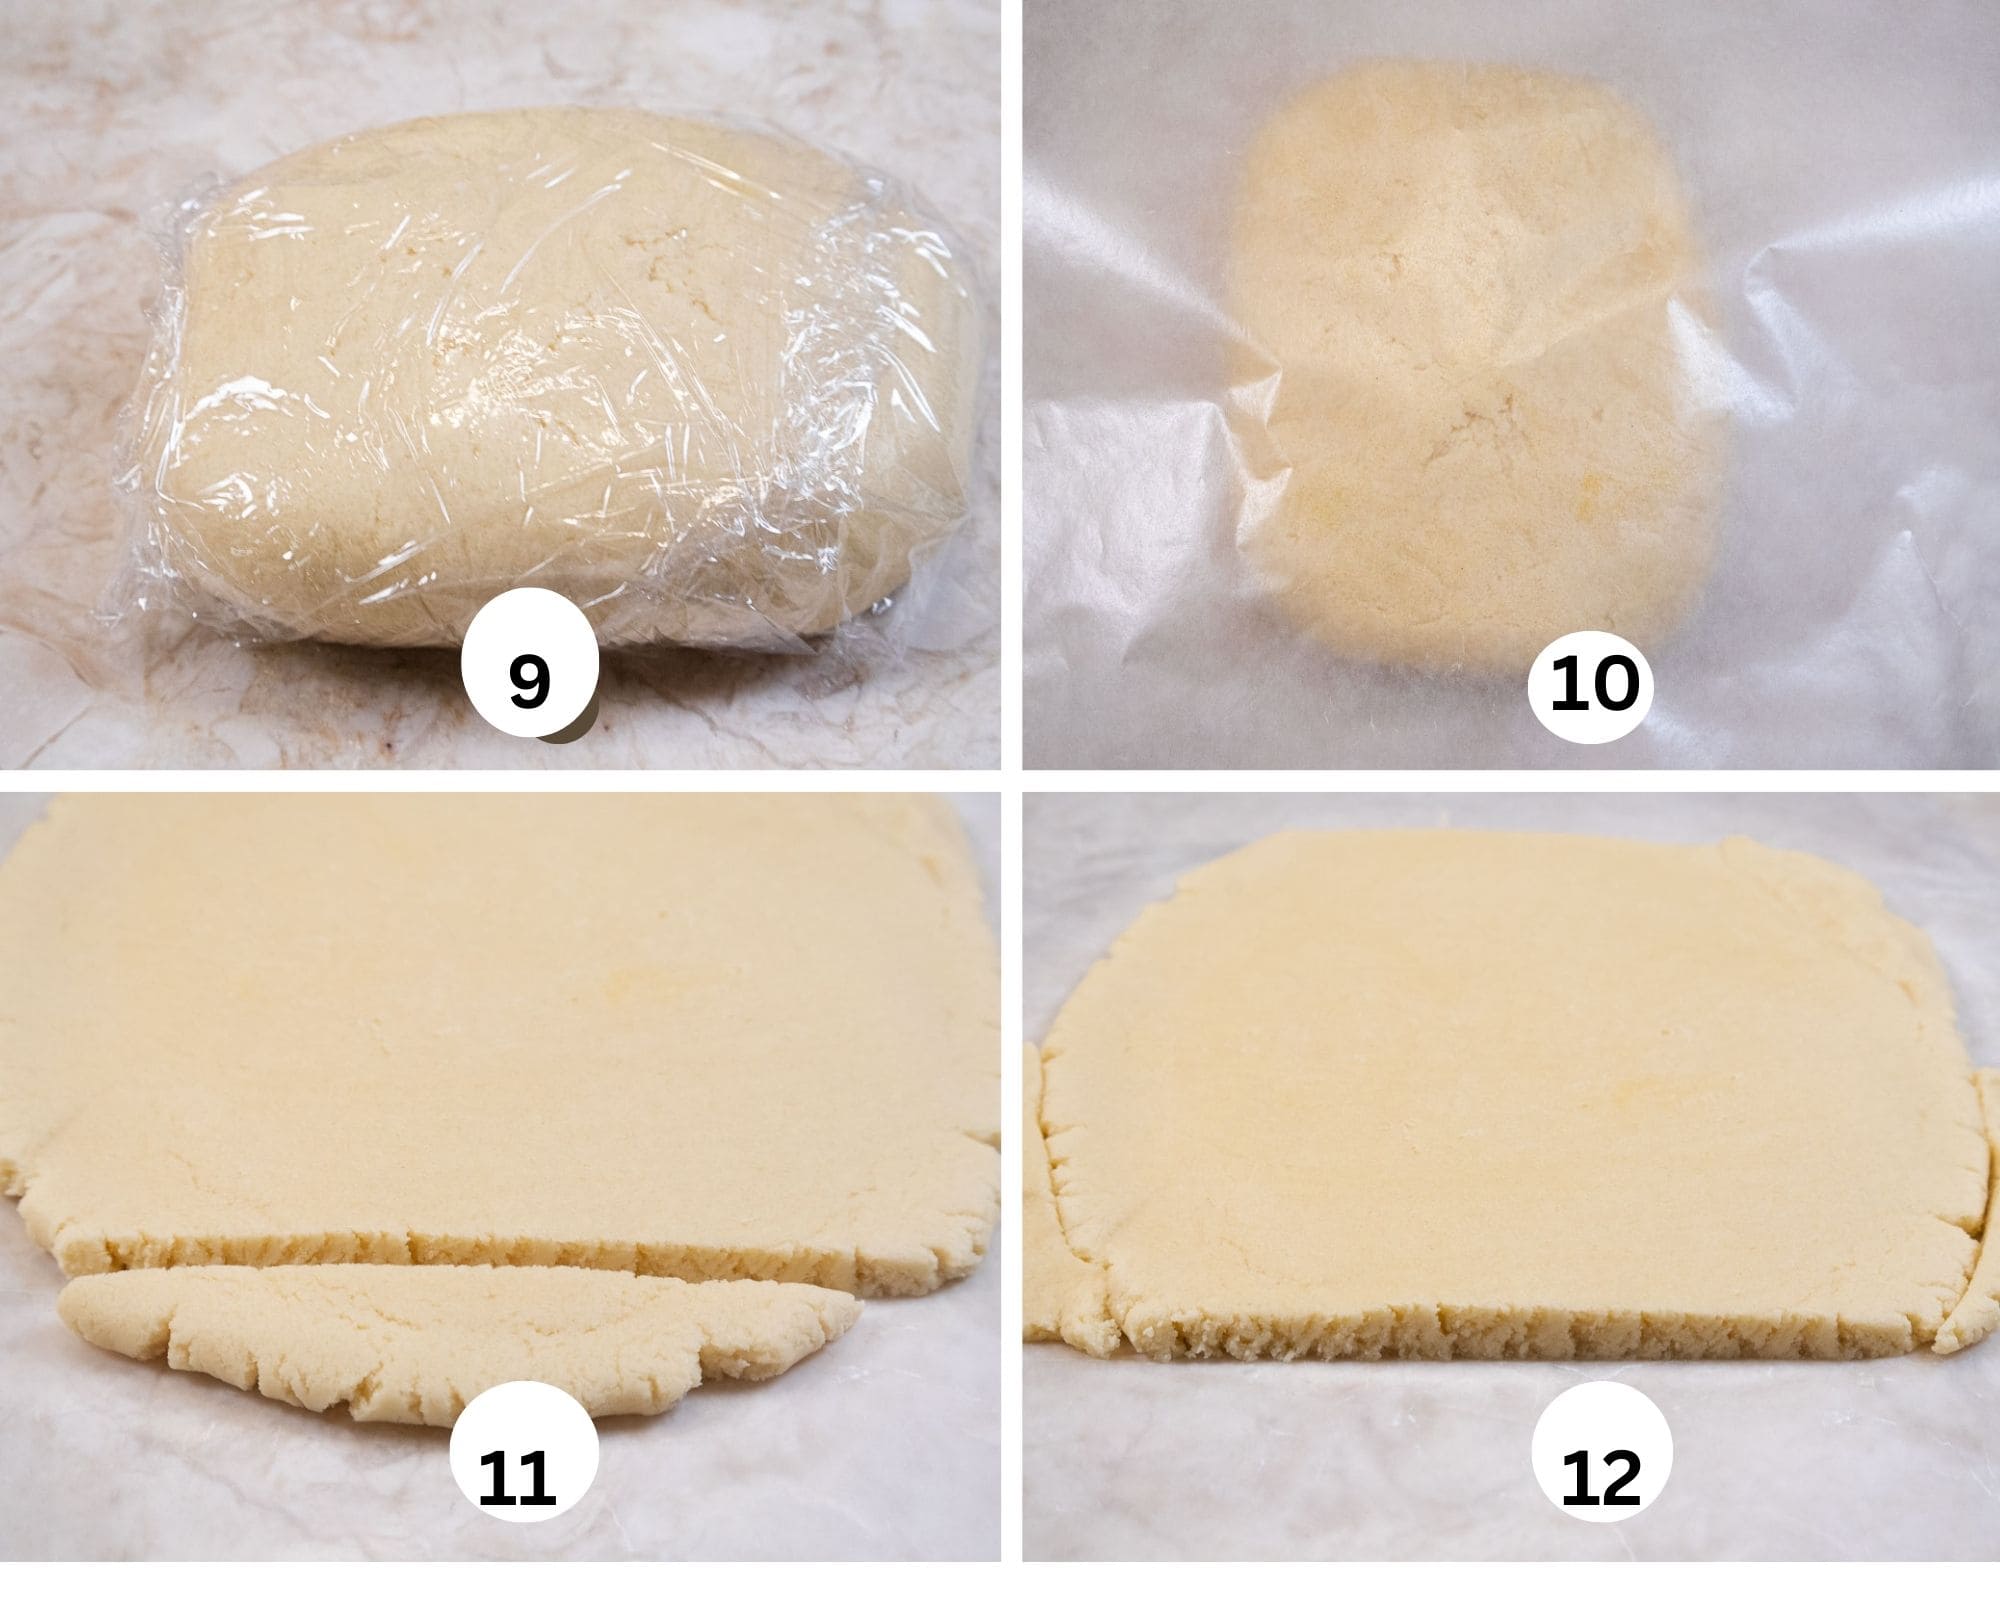 The third collage shows the dough wrapped in plastic wrap, placed between waxed paper, rolled out with the end cut off and the pieces of dough place on the sides to even out the dough.